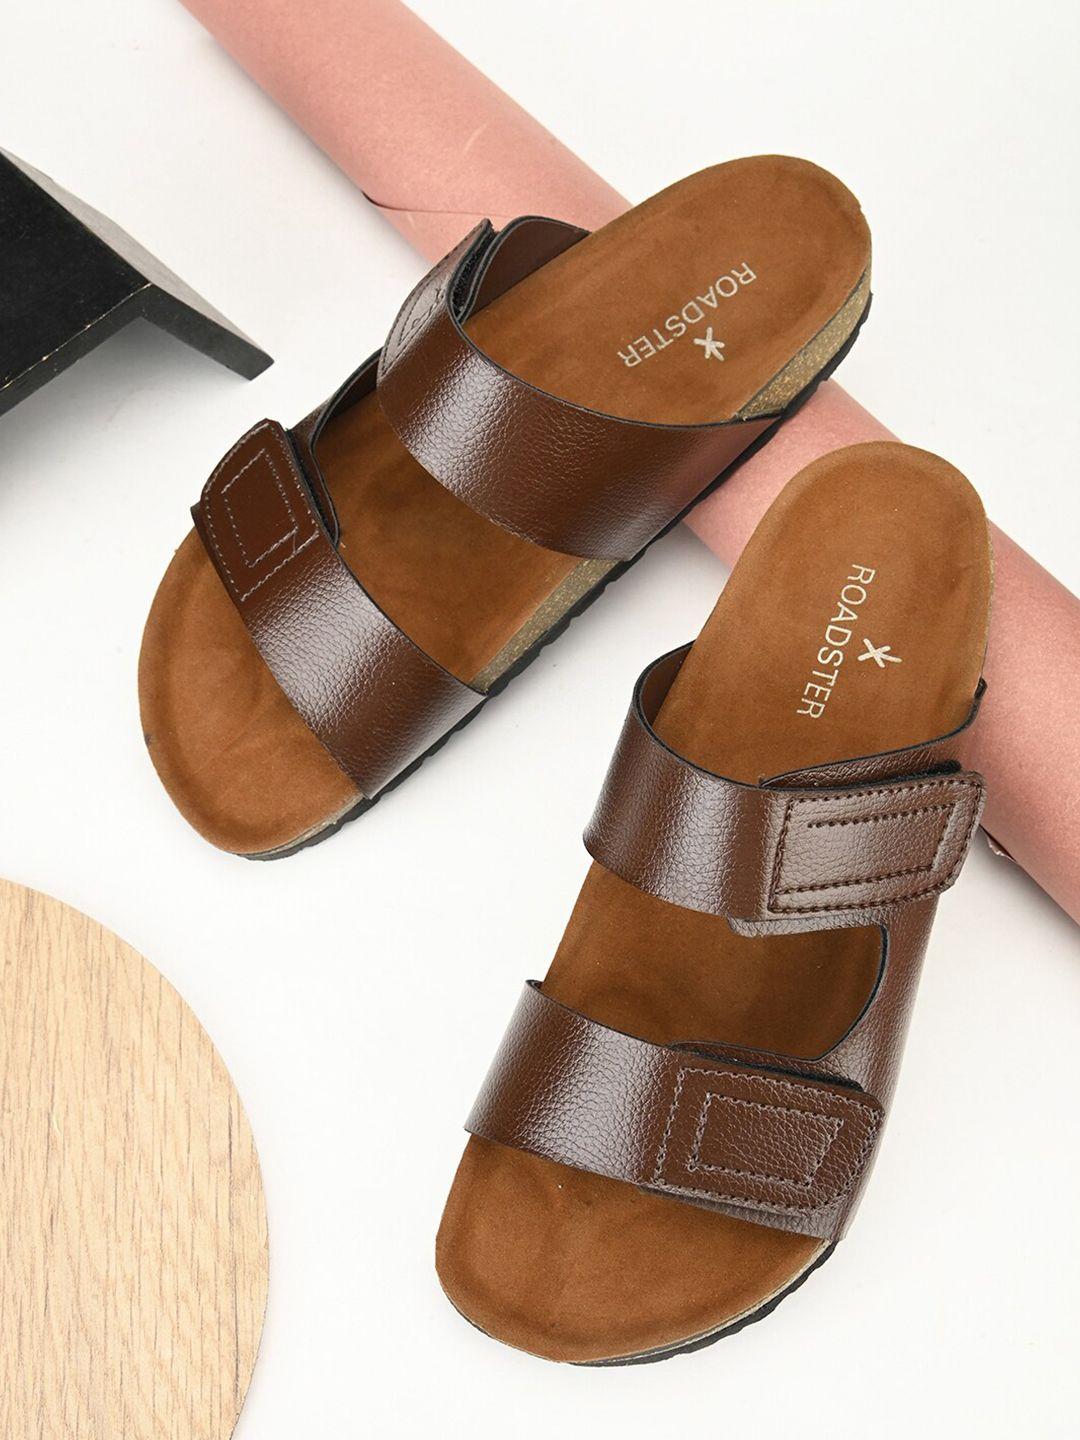 the-roadster-lifestyle-co.-brown-slip-on-comfort-sandals